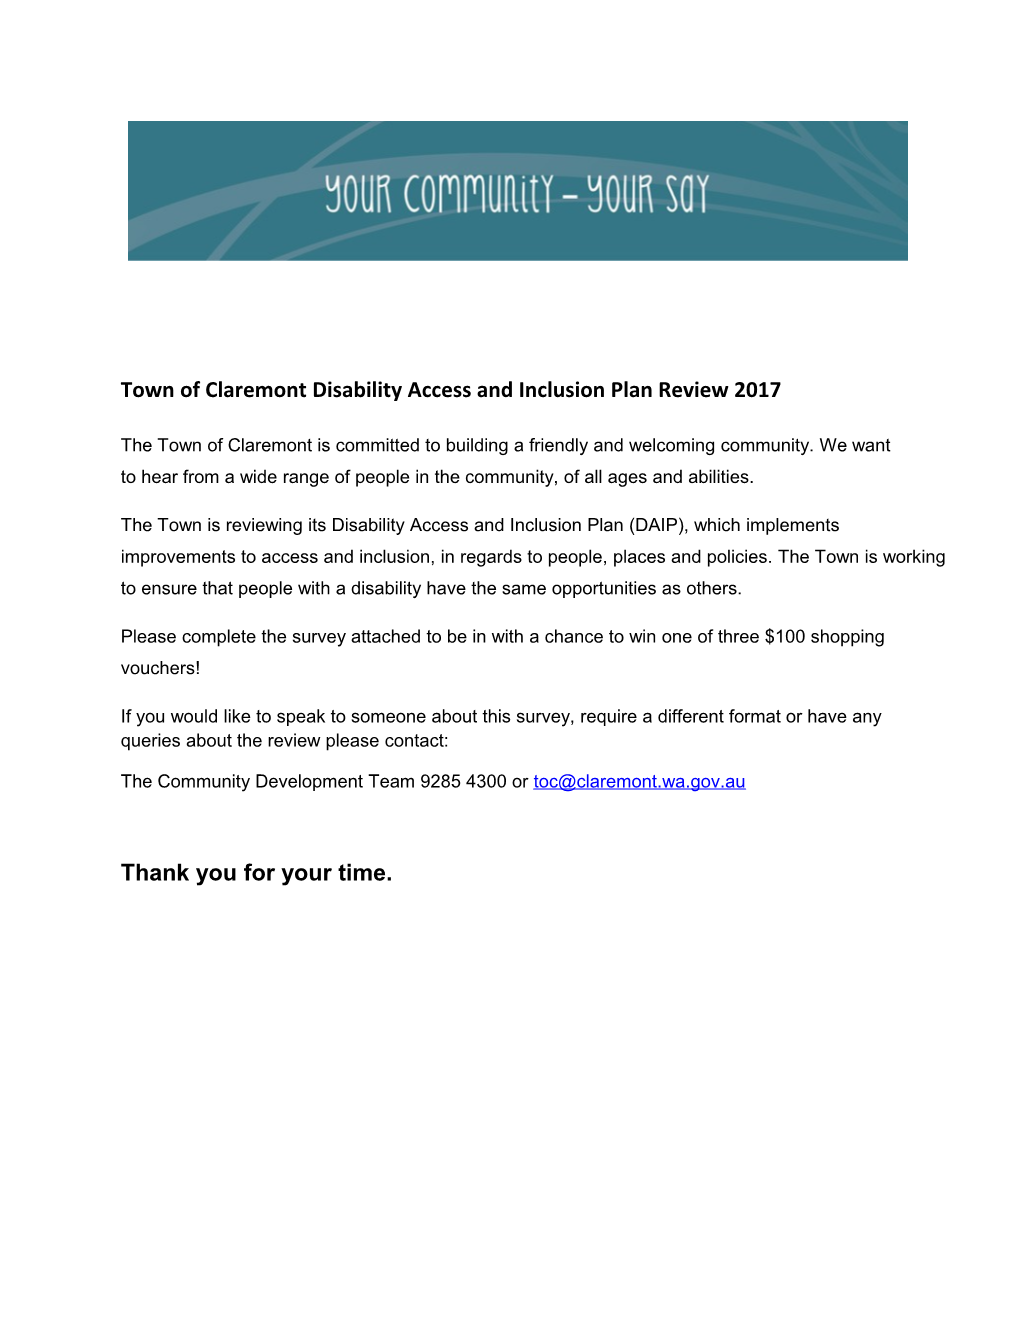 Town of Claremont Disability Access and Inclusion Plan Review 2017